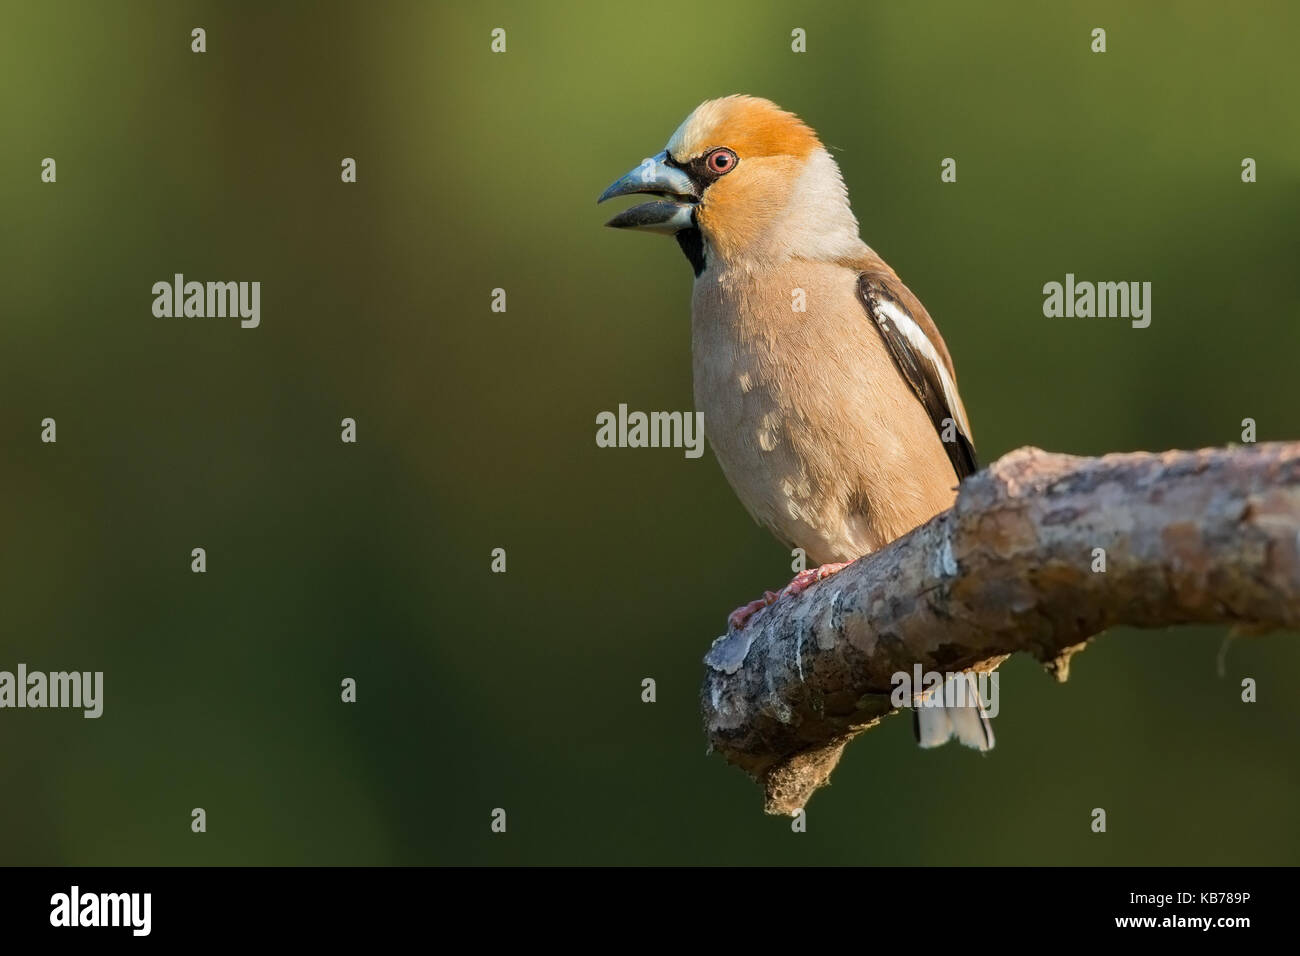 Hawfinch (Coccothraustes coccothraustes) male perched on a branch, The Netherlands, Overijssel Stock Photo